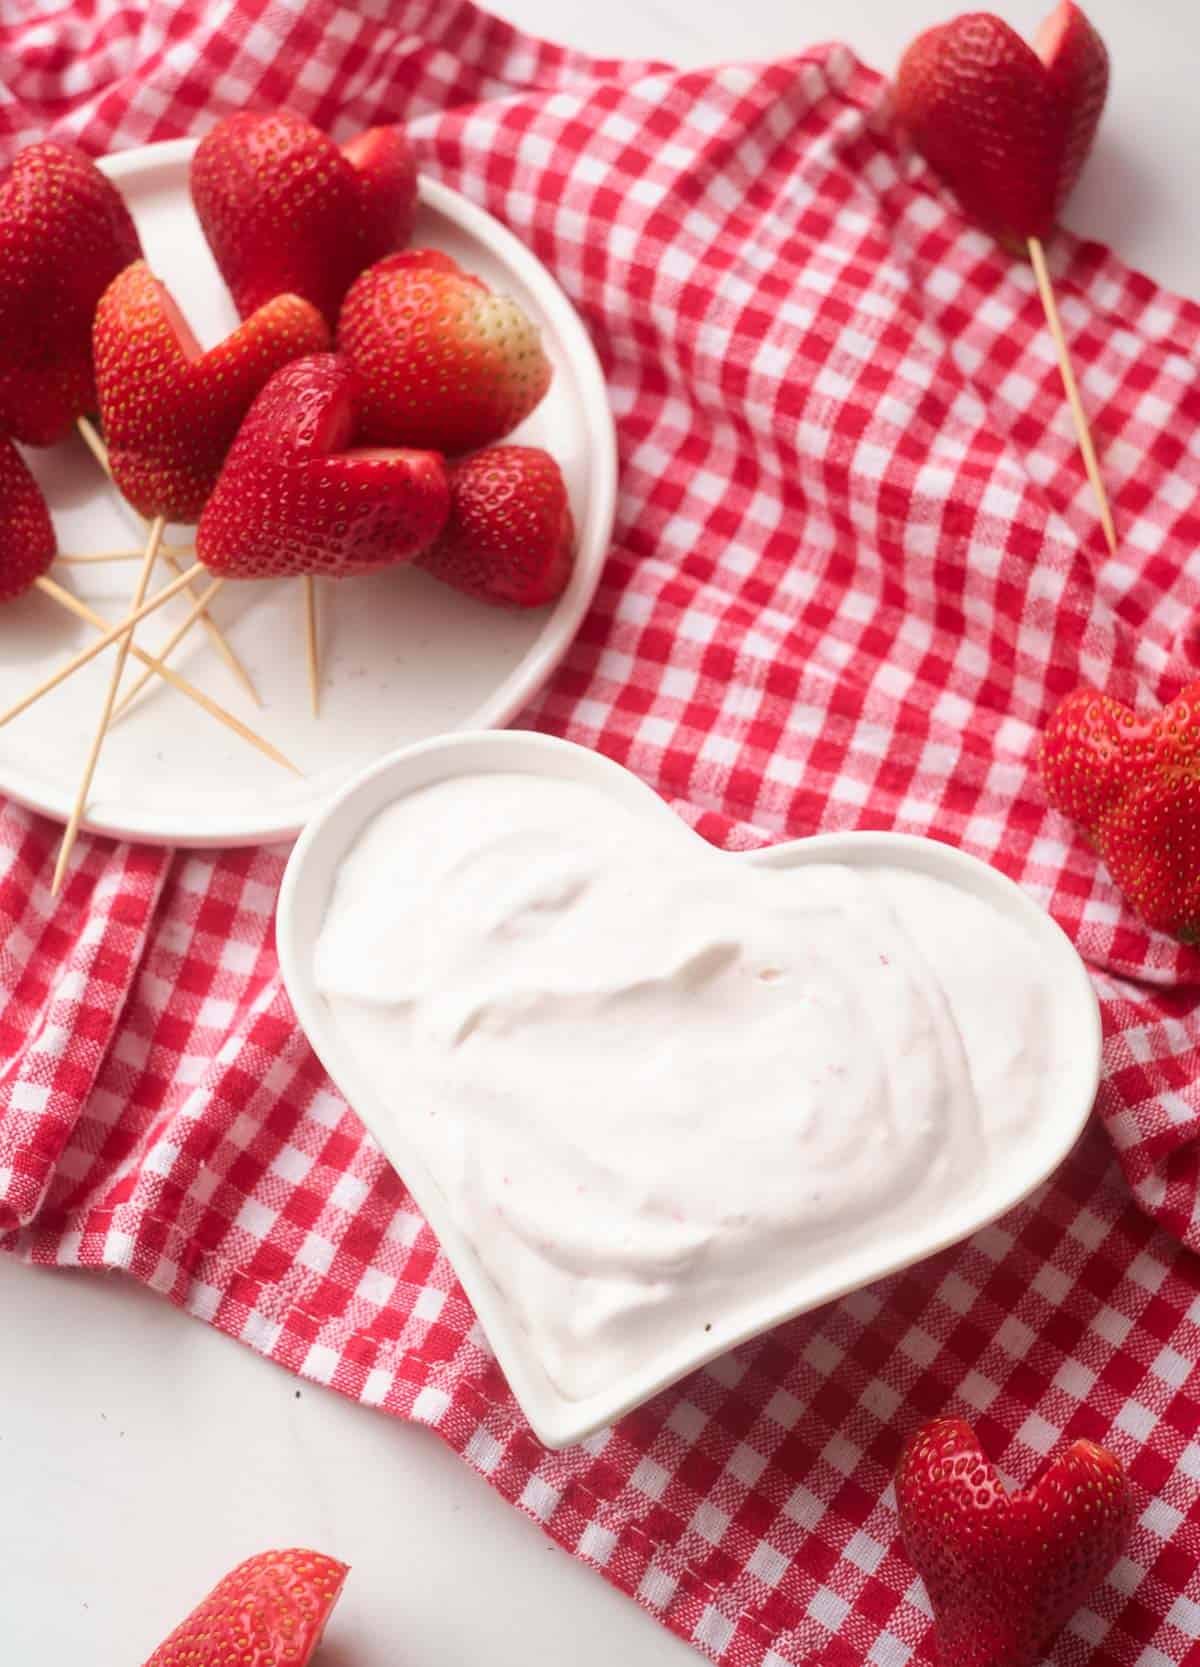 Heart shaped strawberries on toothpicks served with a side of strawberry yogurt in a heart shaped bowl. 